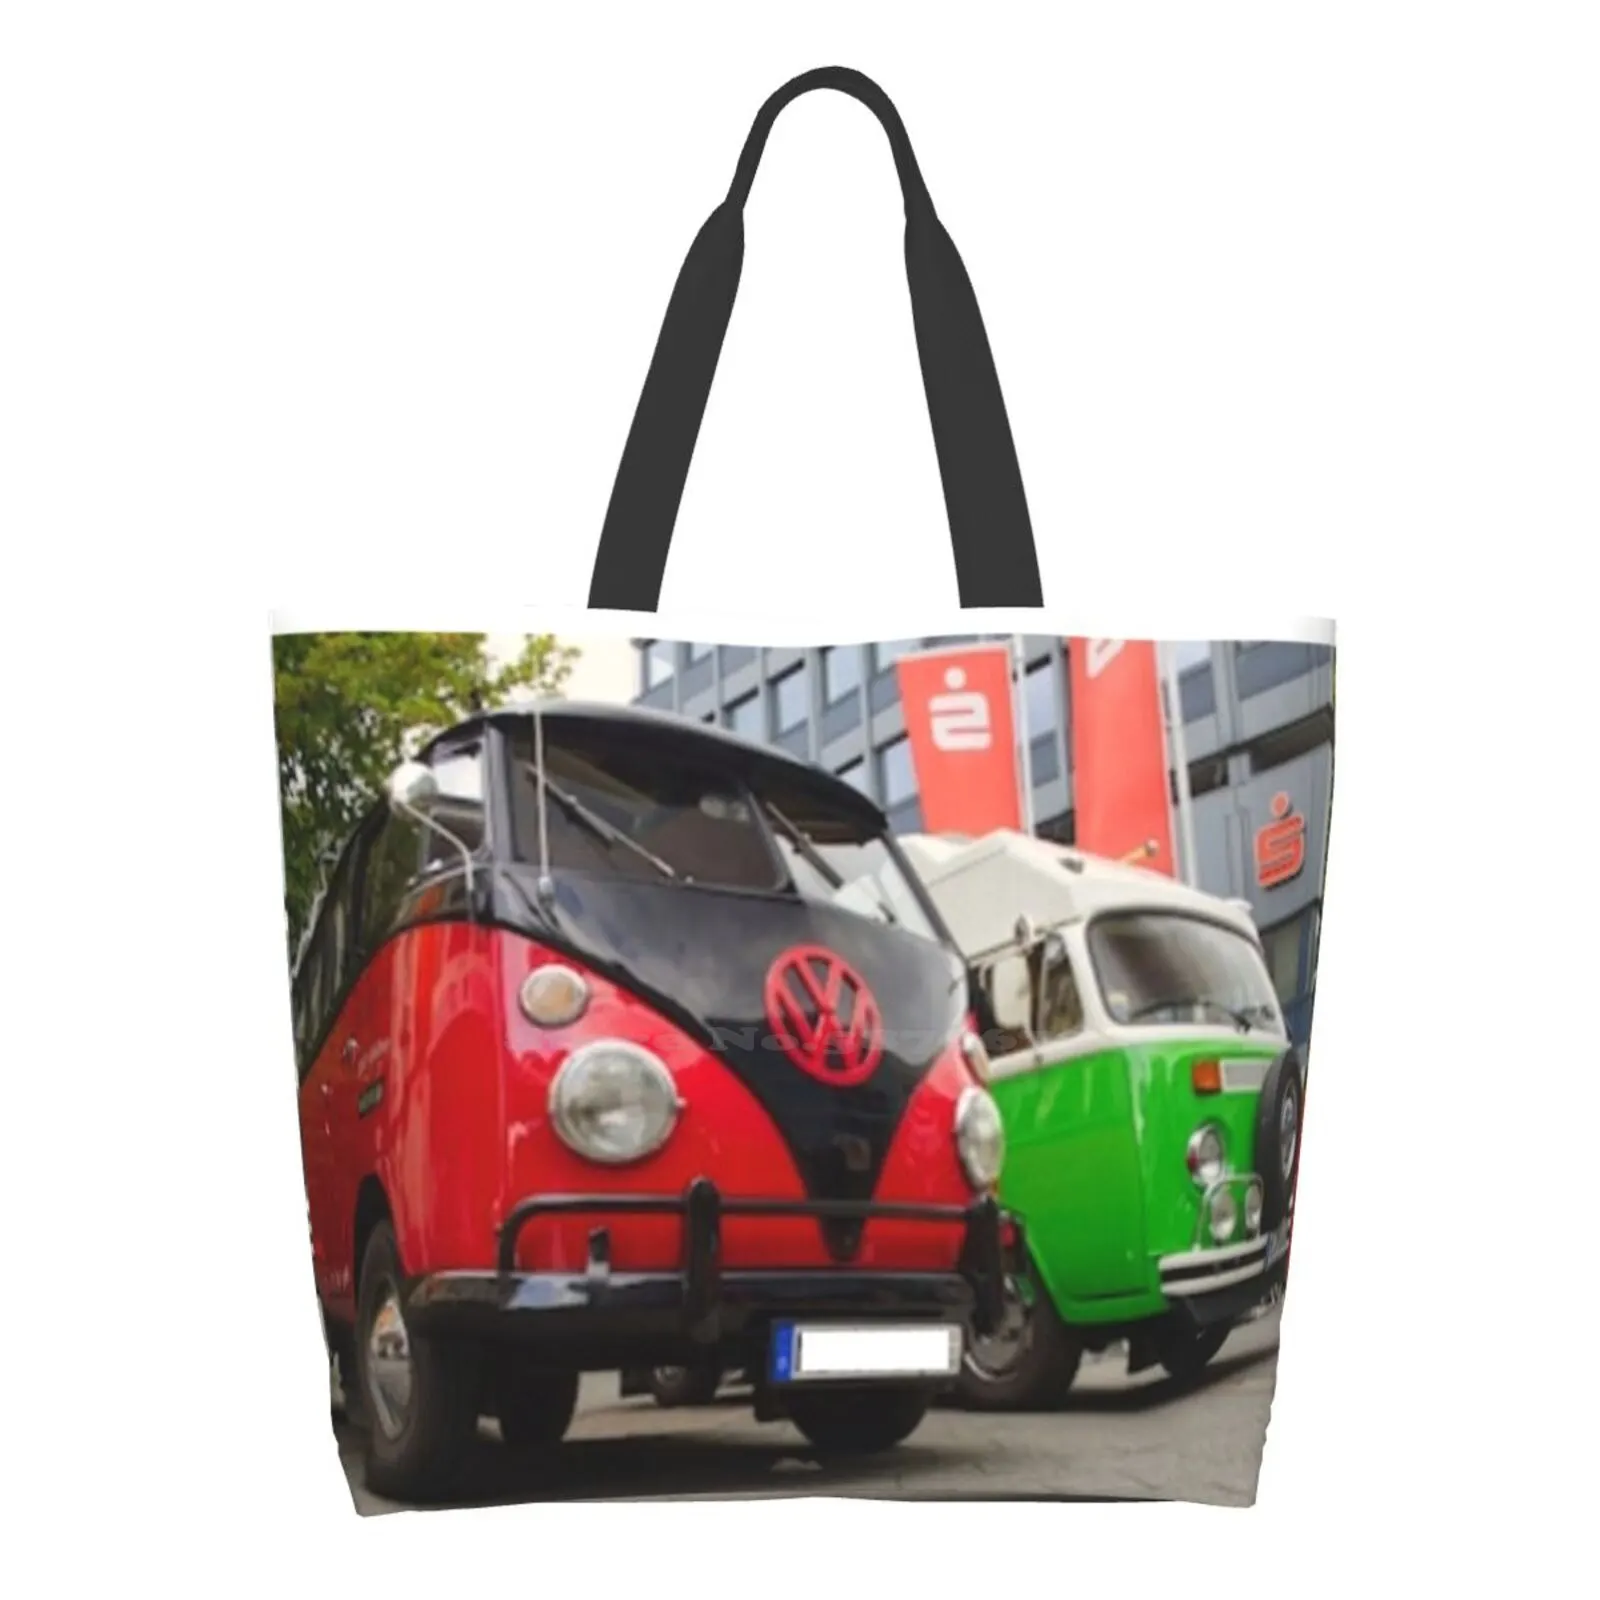 

Bulli T-1 & T-2 Bus Reusable Household Tote Bags Storage Bags Bulli T1 Bus Bus Bulli T1 T 1 T 1 Retro Vintage Cool Automobile